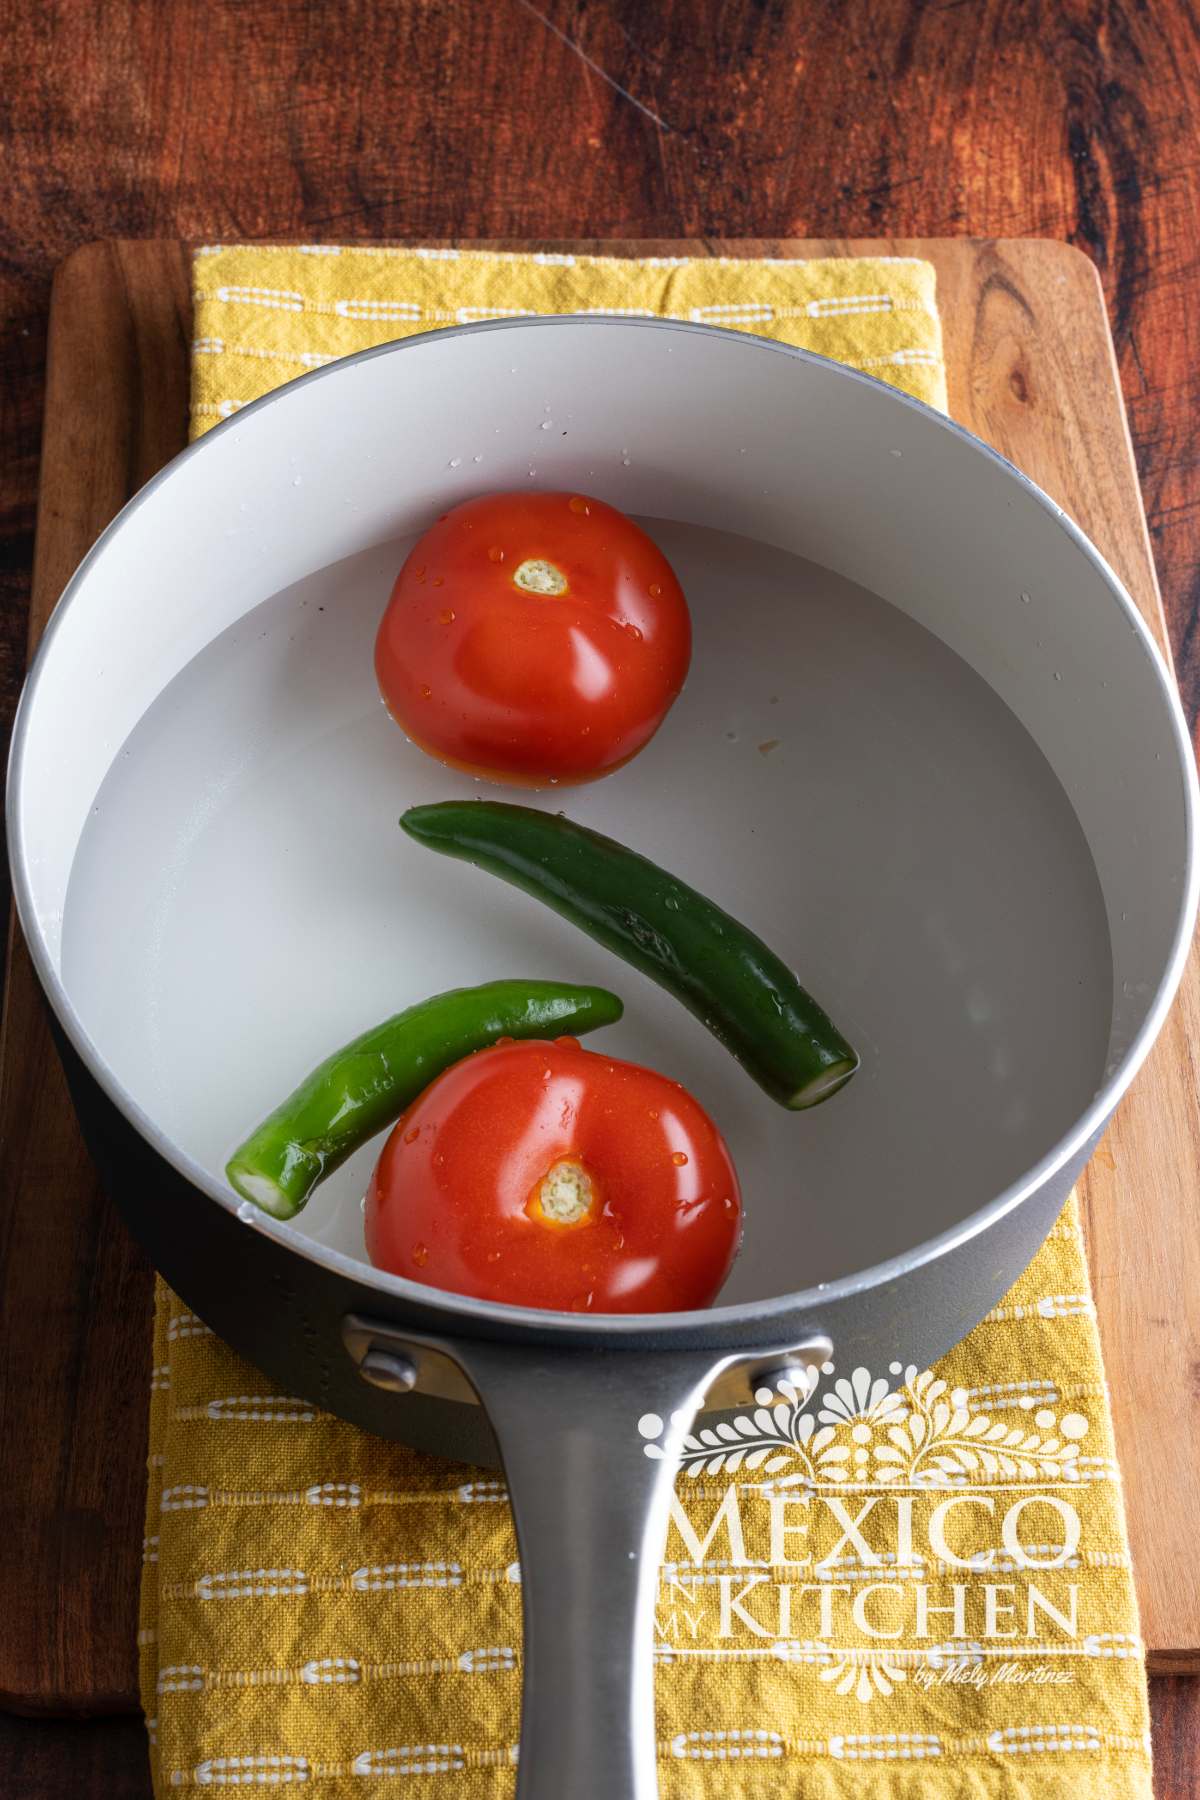 Raw tomatoes, and peppers in a saucepan with water.